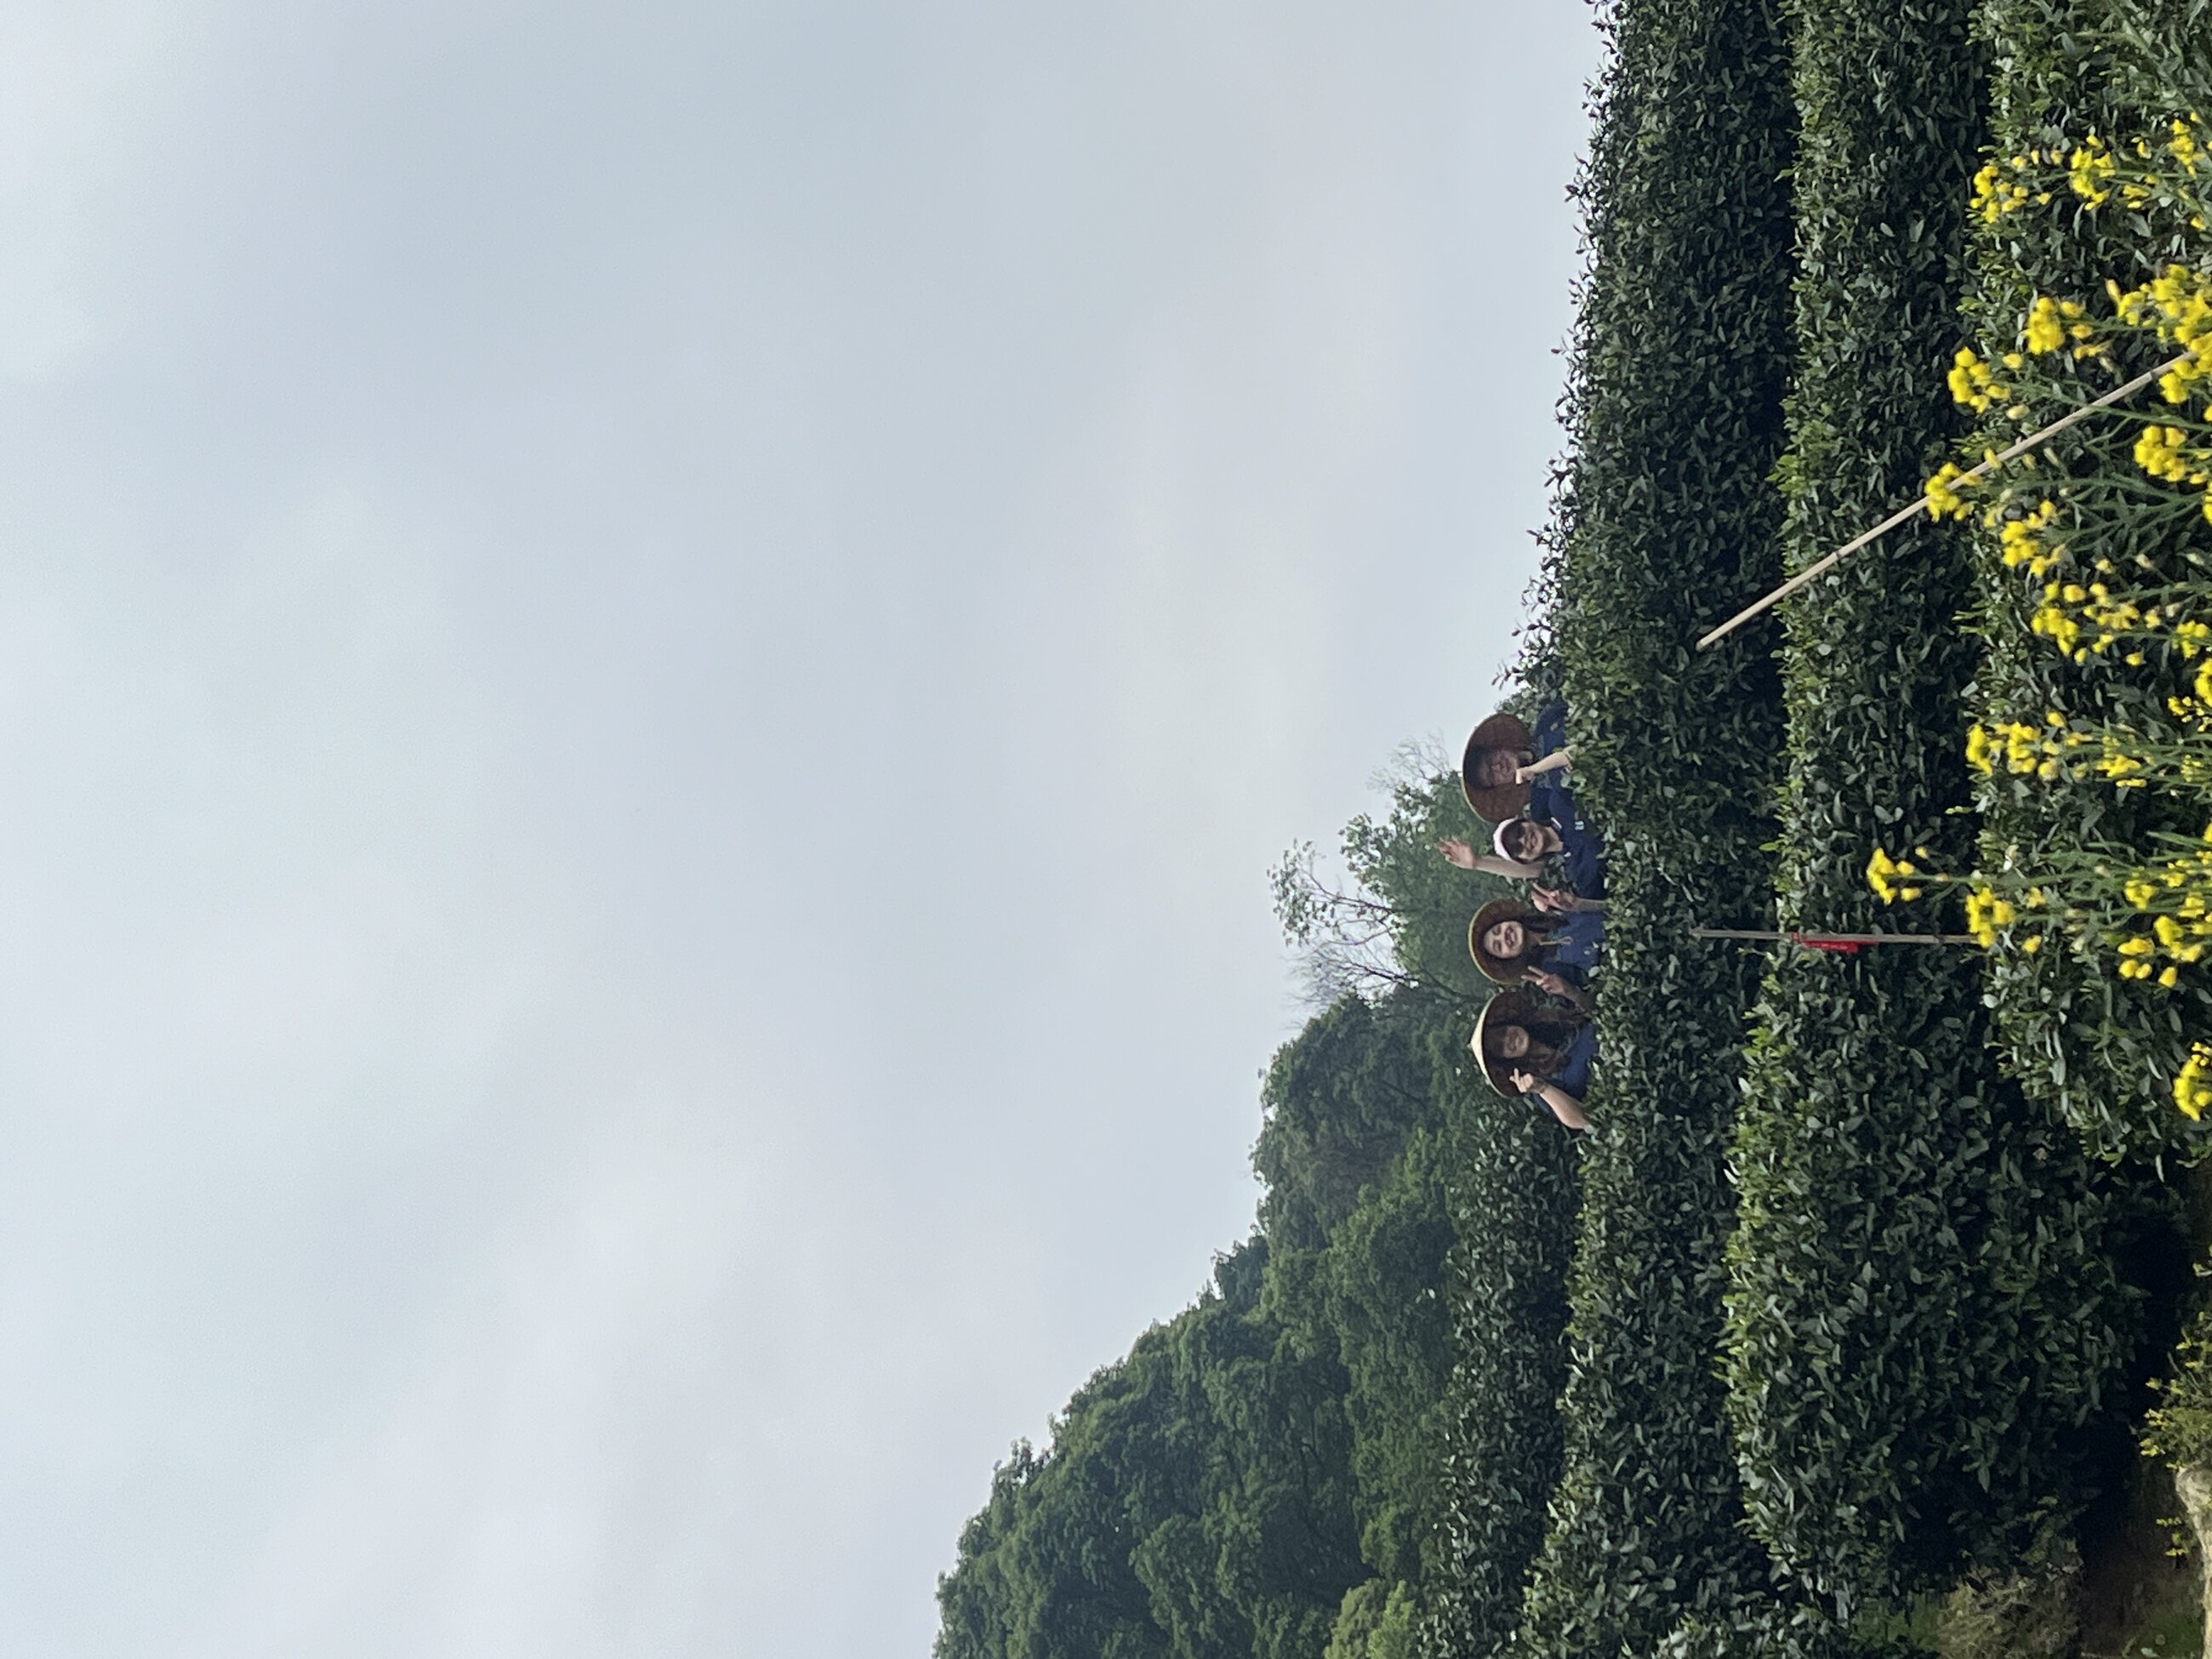 we went on a tea-picking experience in hangzhou